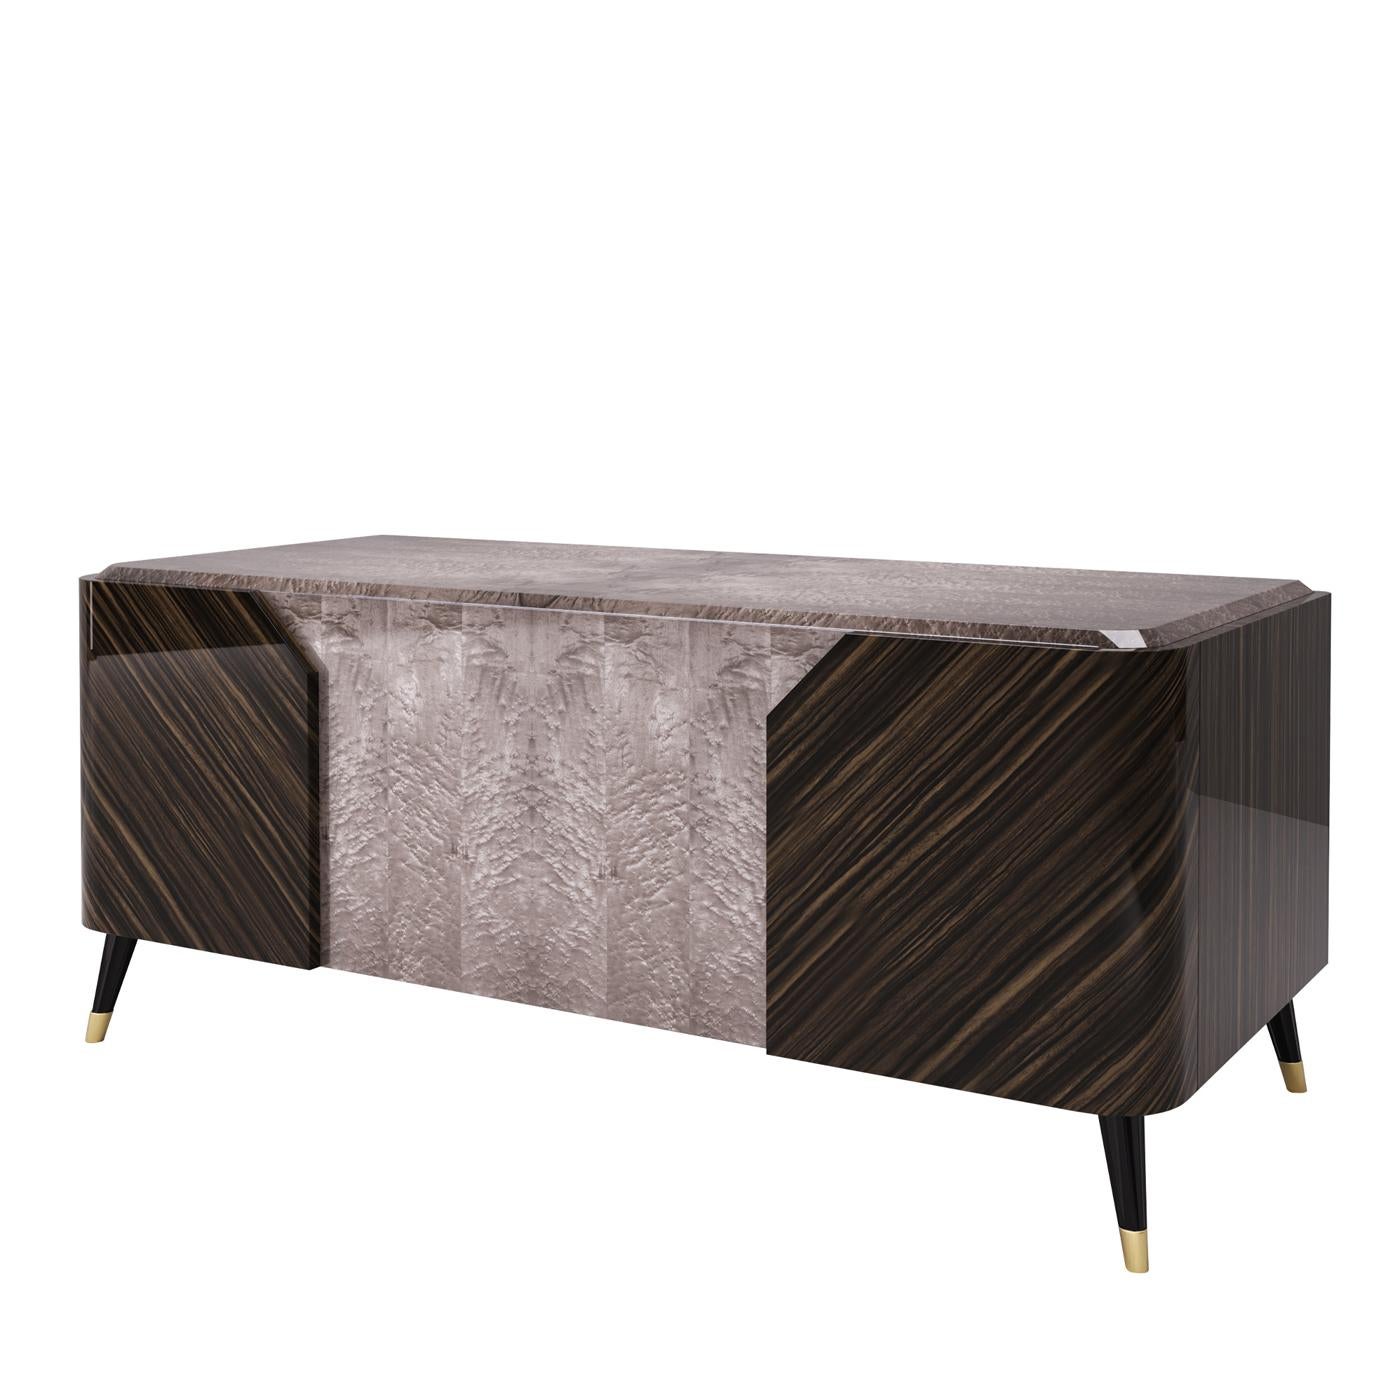 Blending form with function, this elegant desk is the perfect sophisticated pick for the office. The thick wood desktop is in a gray hue, while the body and sides of this piece are in a dark ebony finish. Practical drawers on each side will hold all